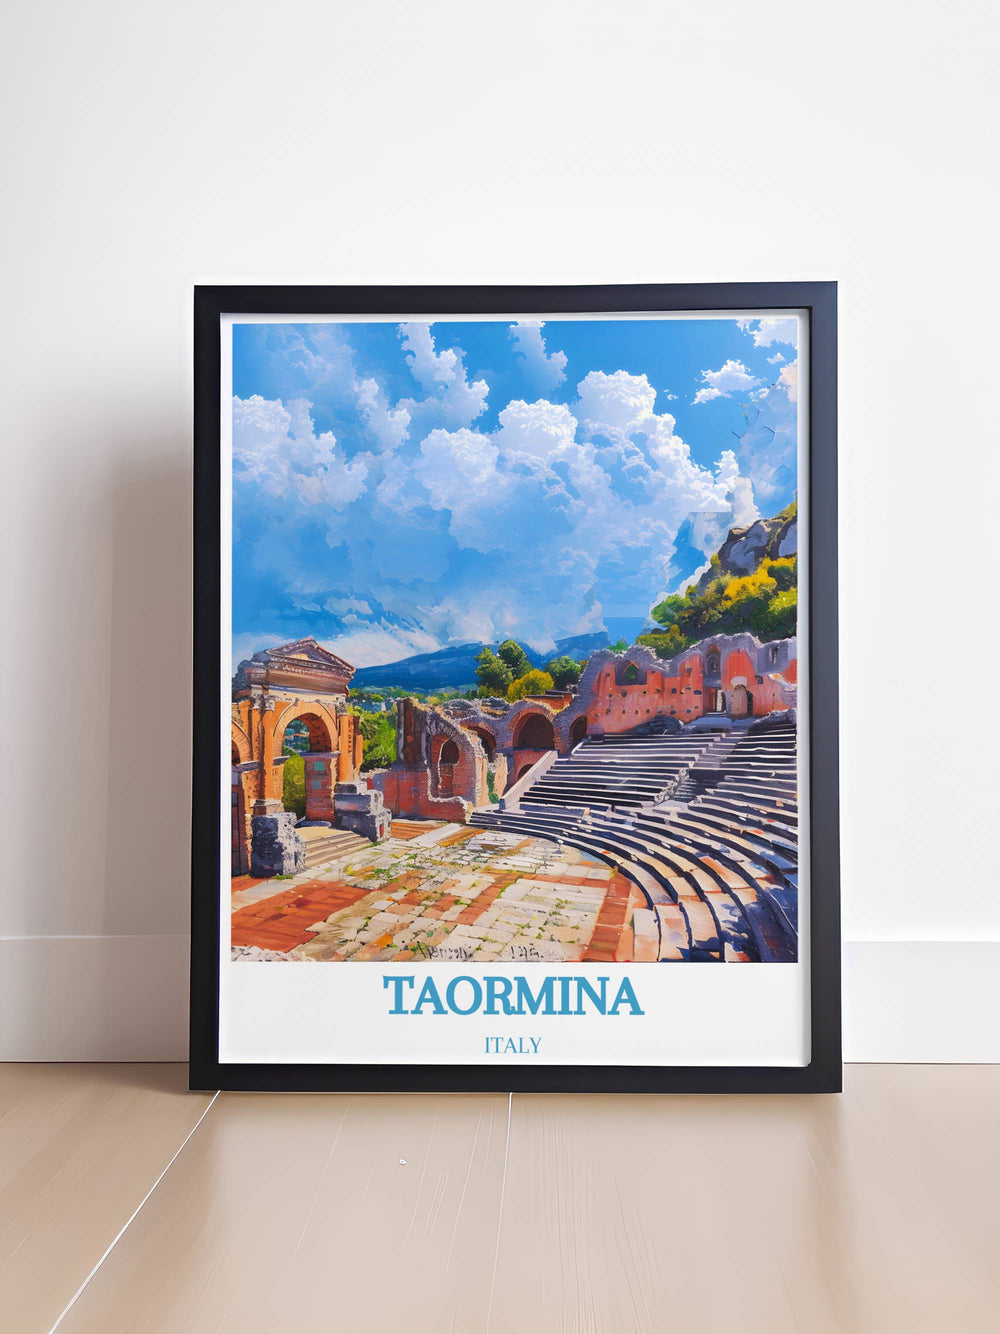 Stunning modern wall decor featuring contemporary designs inspired by the unique charm of Taormina, Italy, ideal for enhancing any interior with a blend of modern aesthetics and traditional elements.